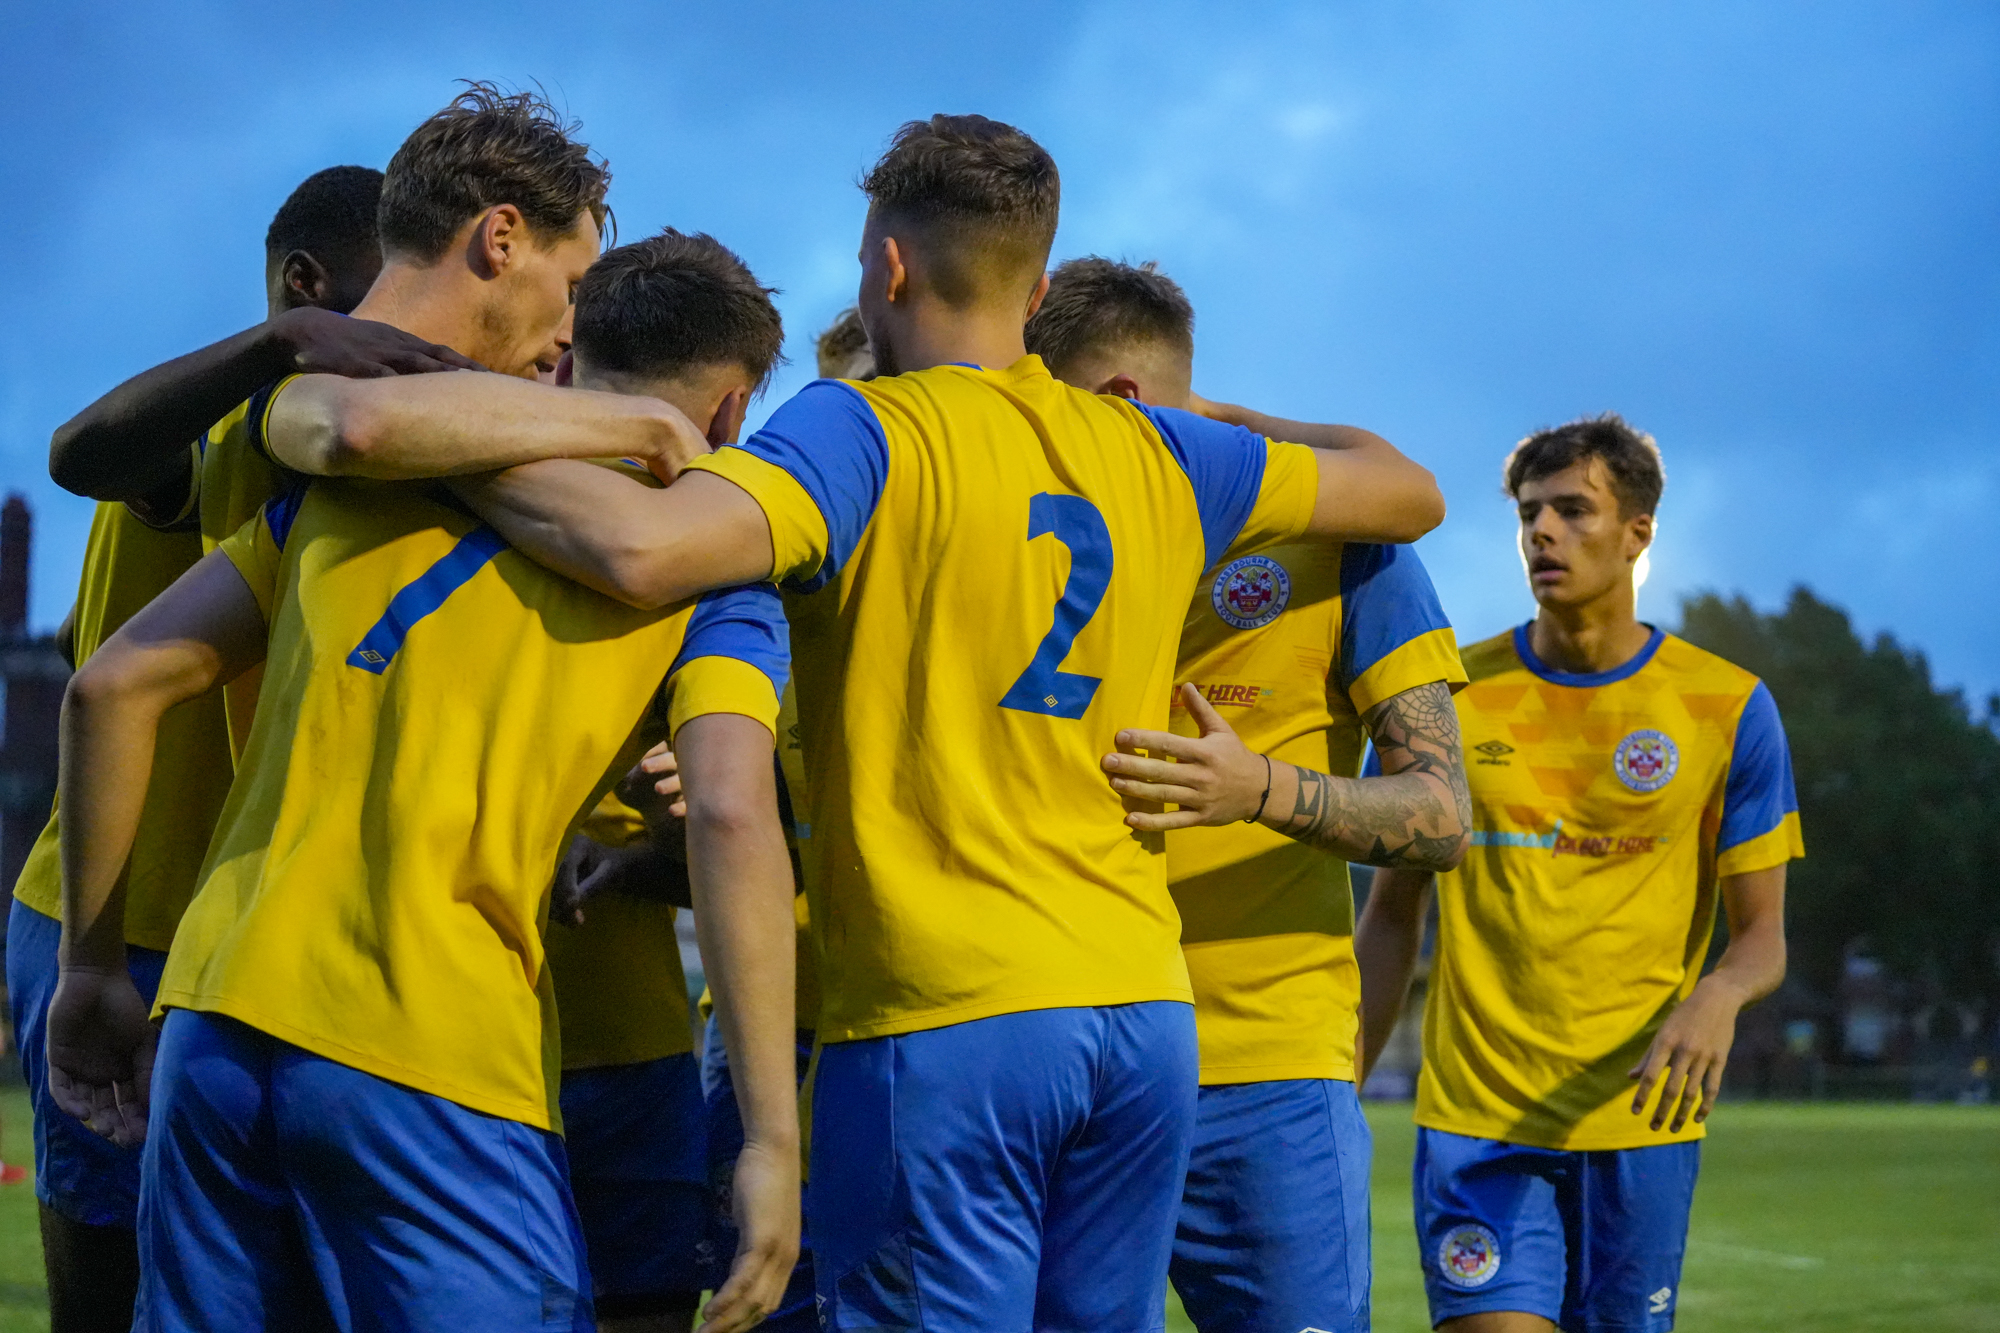 Eastbourne Town Mens Team Huddle To Celebrate Goal